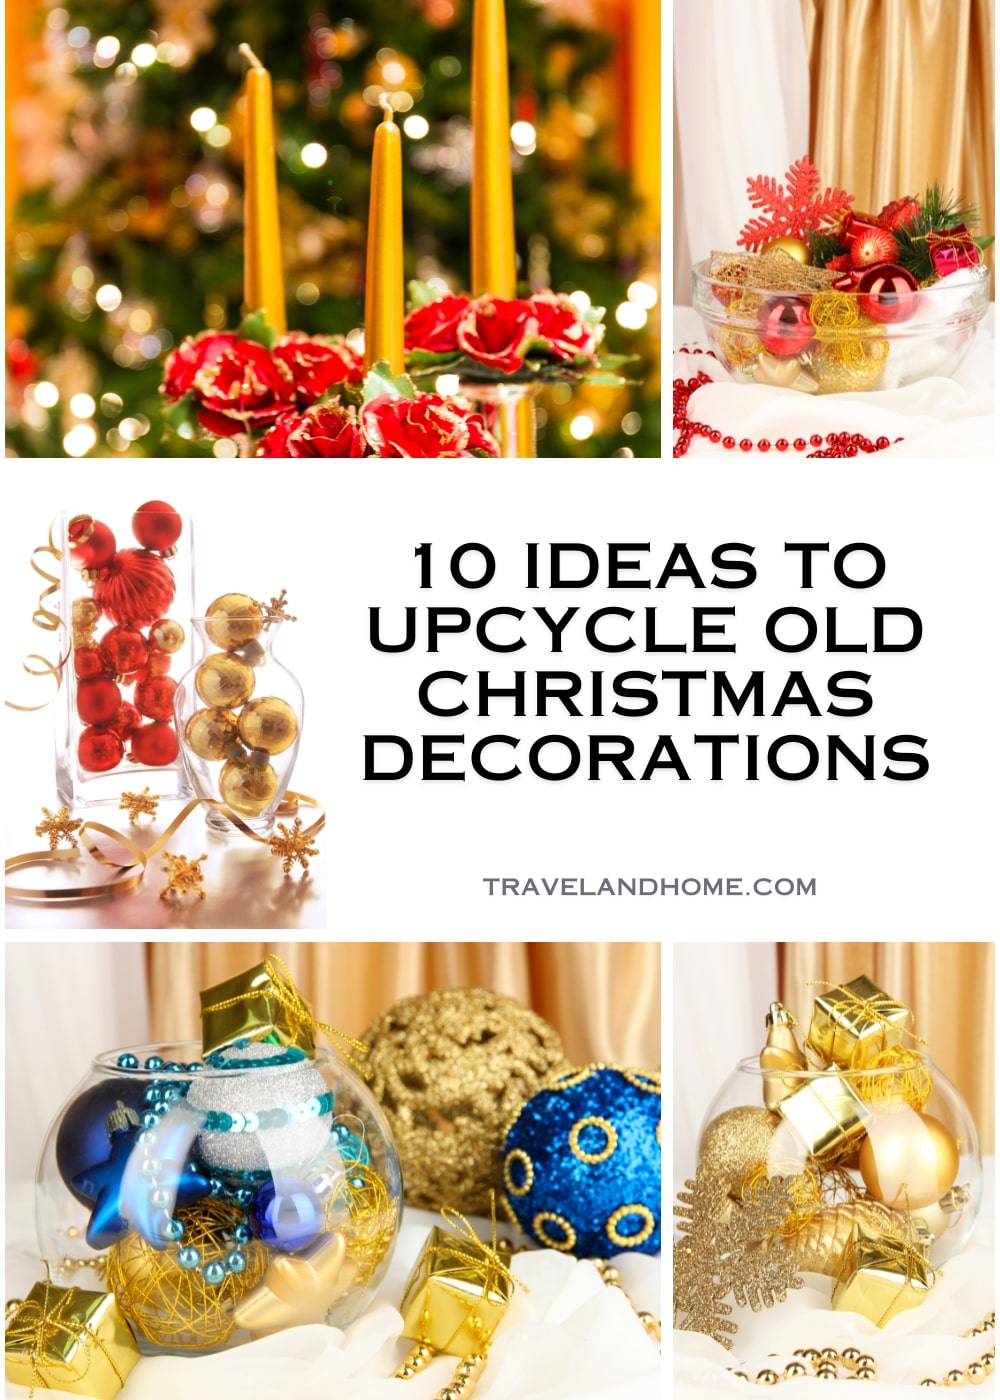 Ideas to upcycle old Christmas decorations min